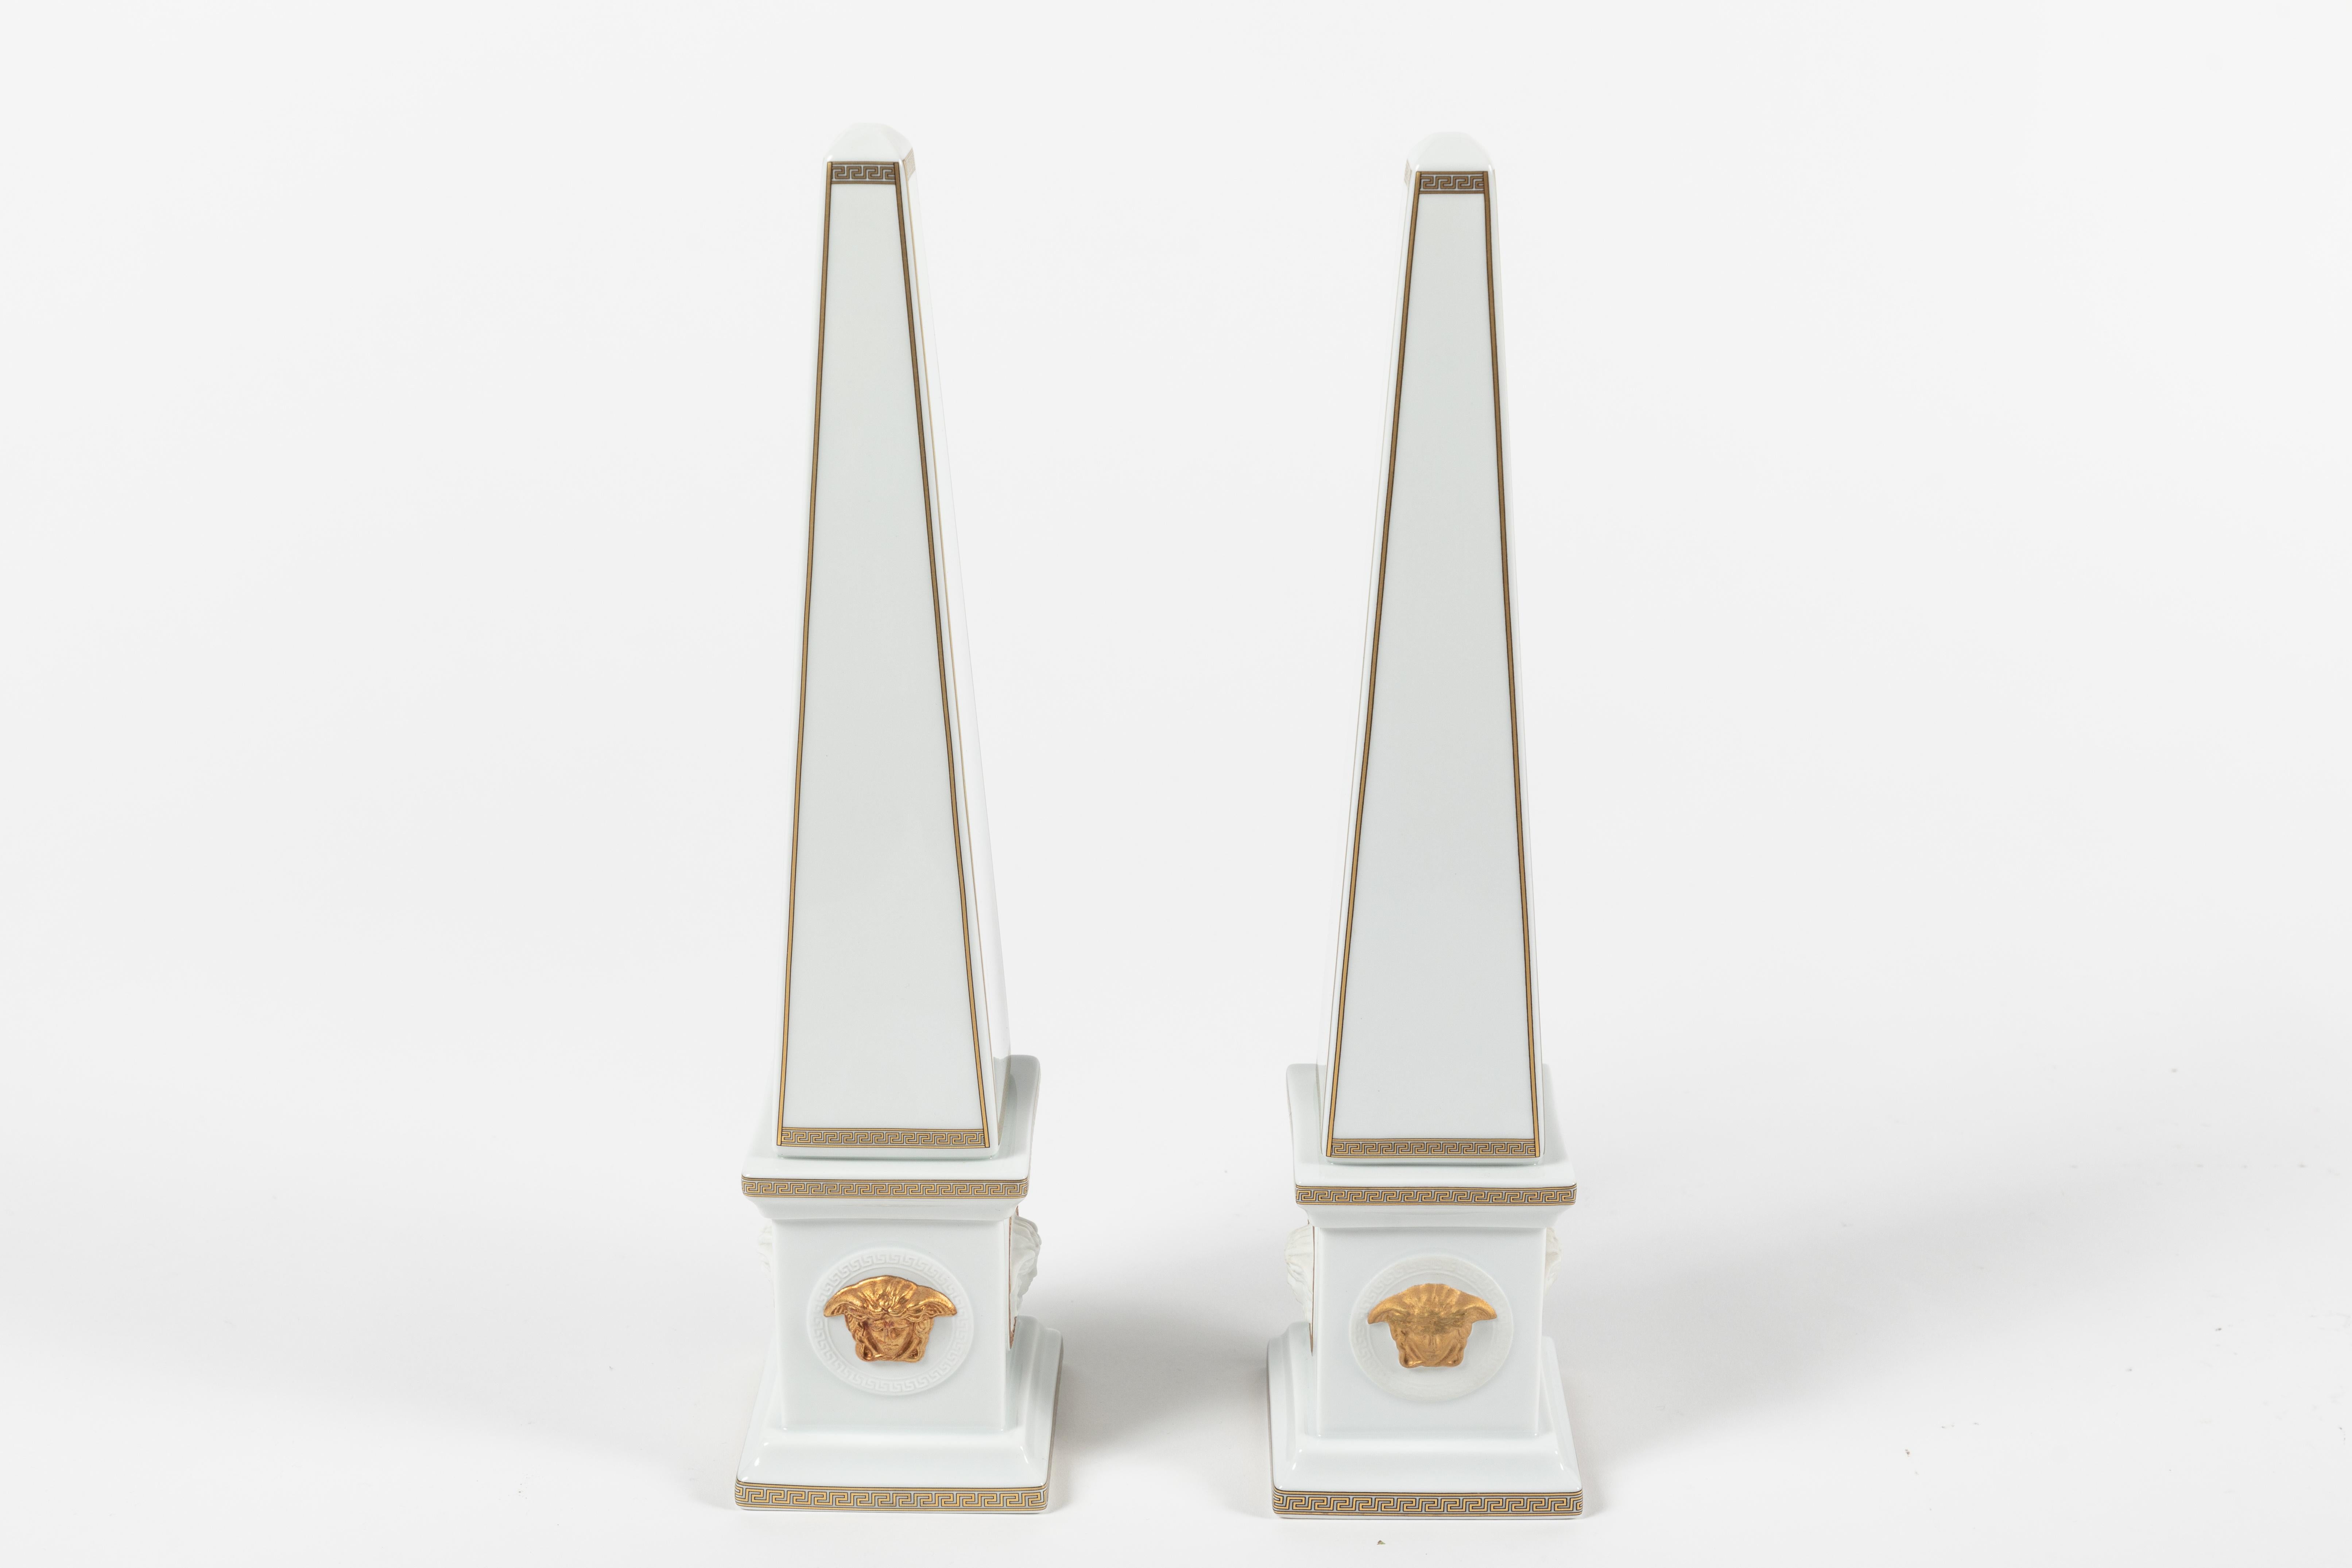 These are a pair of porcelain obelisks designed by Versace and produced by Rosenthal Germany. Four Versace logo medusa heads in gilt glaze grace the four sides of the base while the iconic Greek key pattern is decorated ornately around the edges.